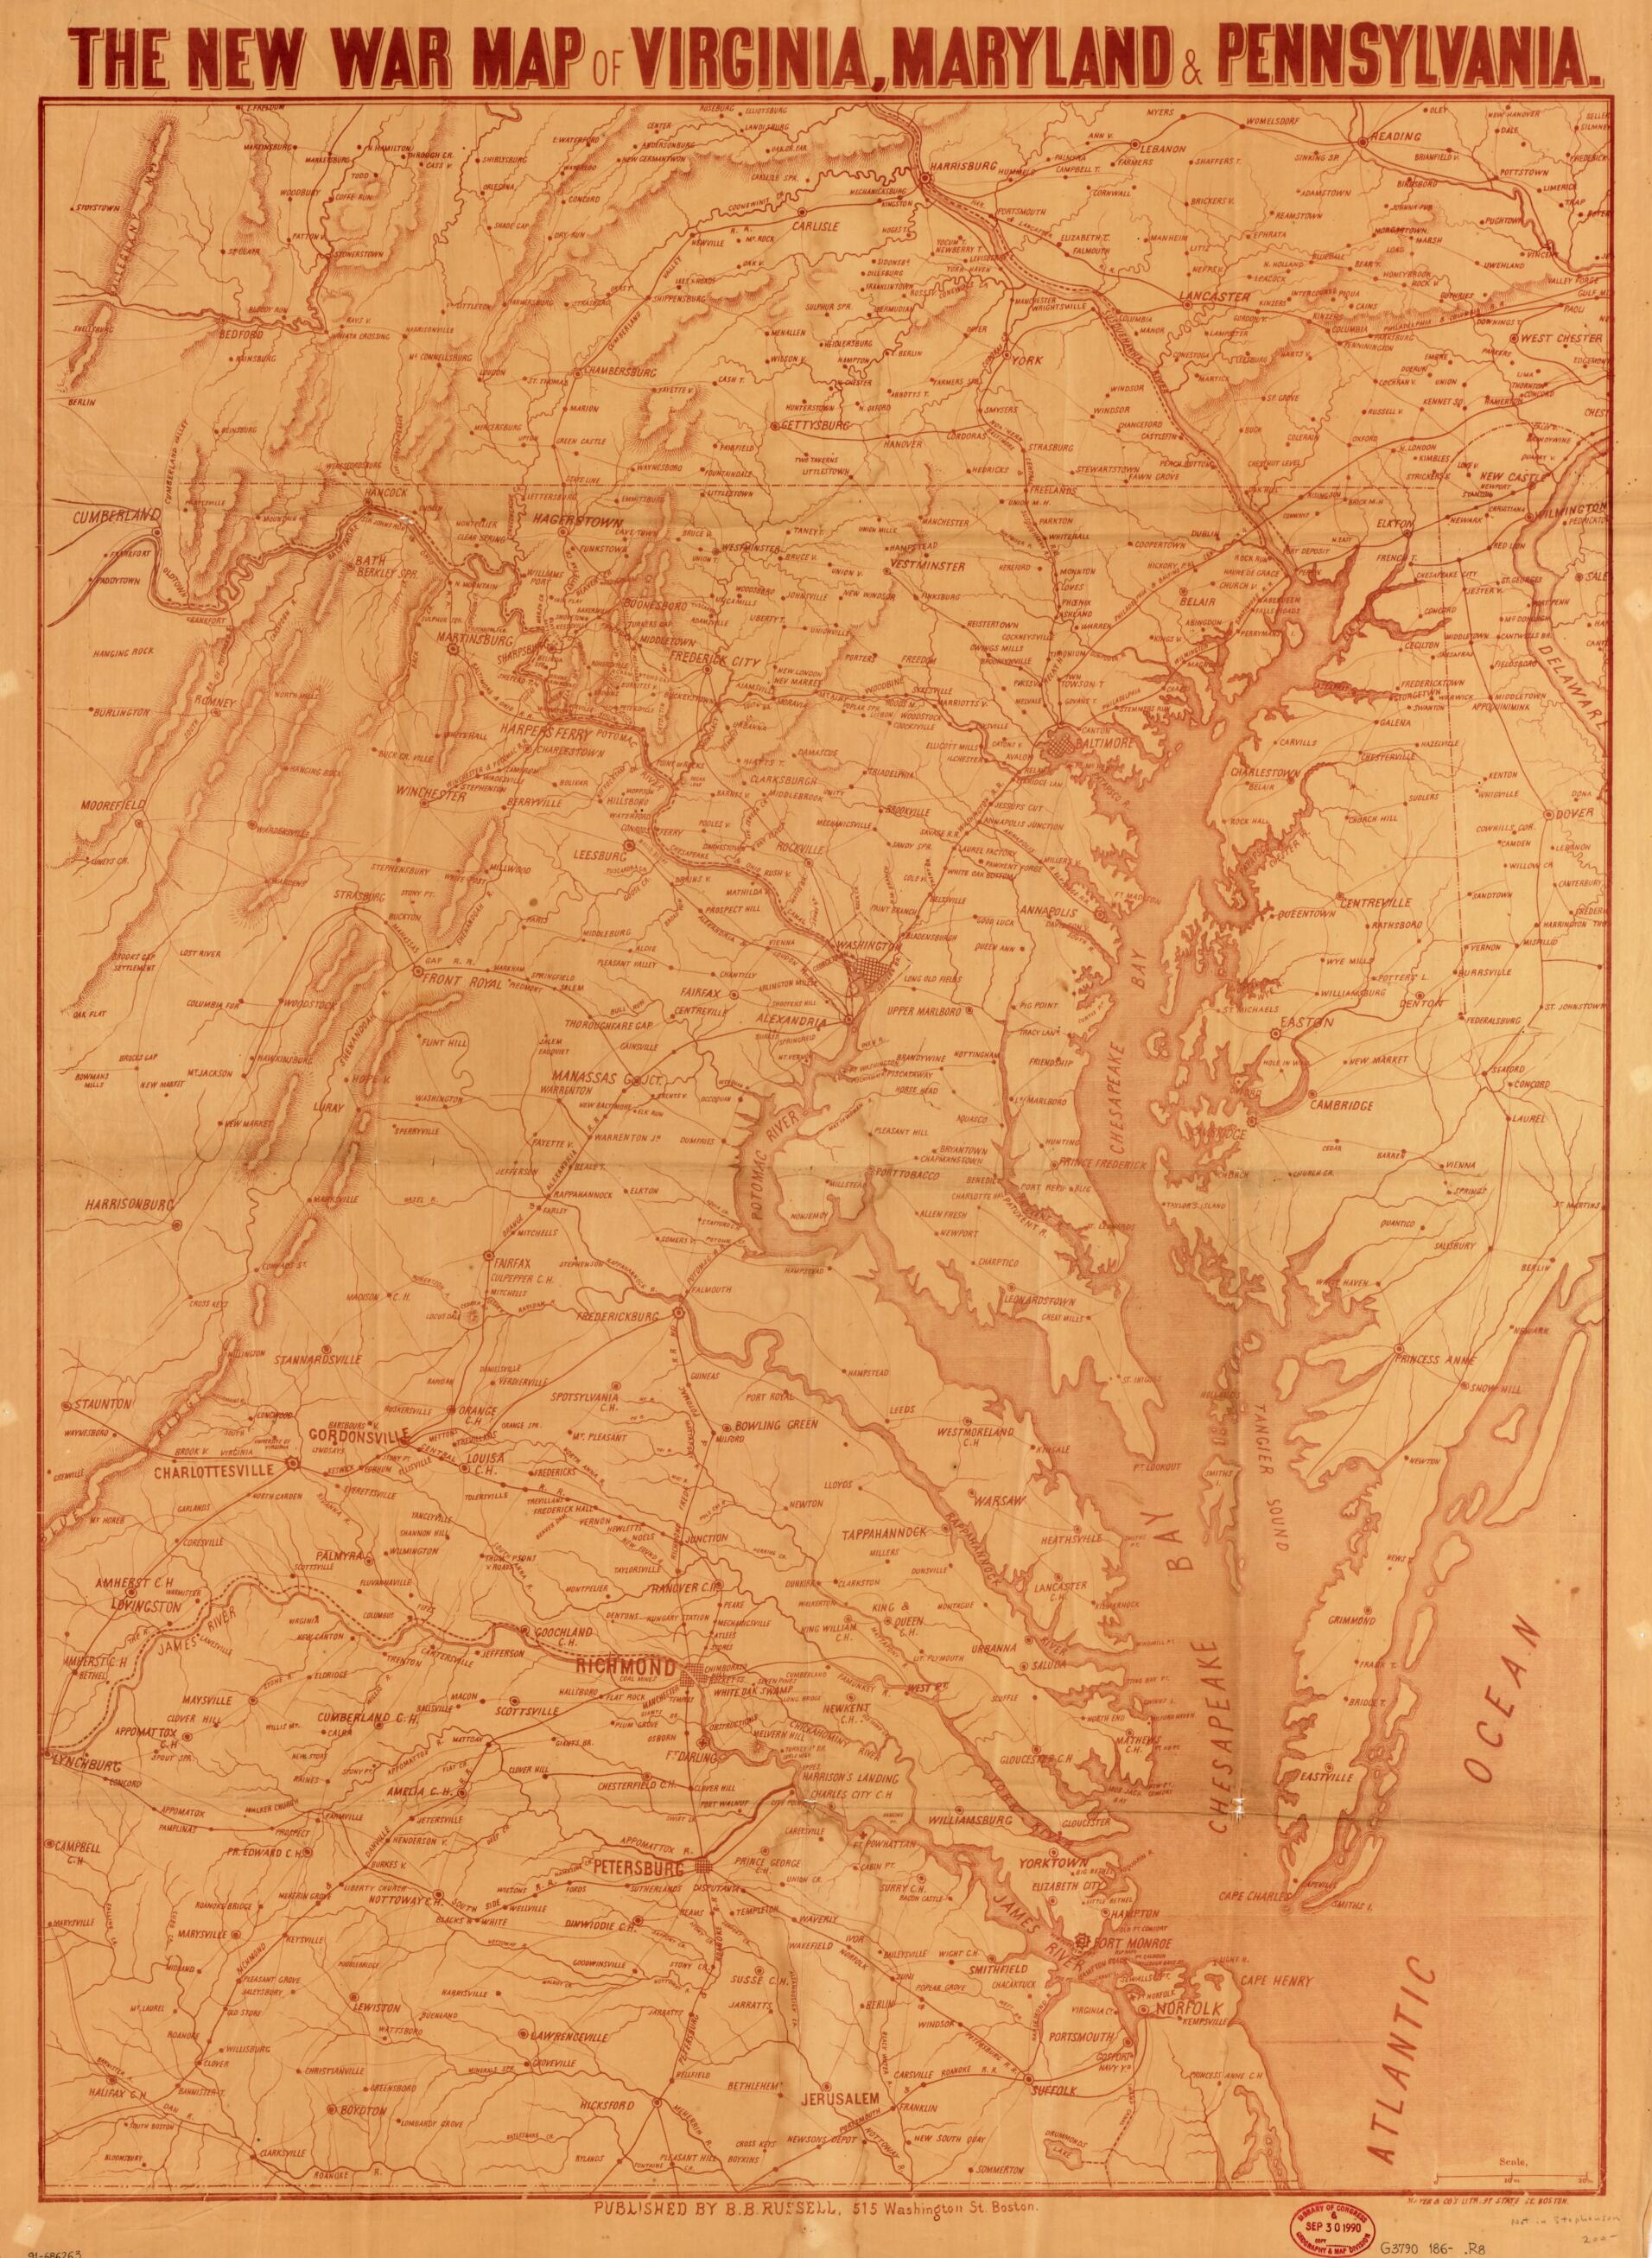 This old map of The New War Map of Virginia, Maryland &amp; Pennsylvania from 1860 was created by B. B. (Benjamin B.) Russell in 1860